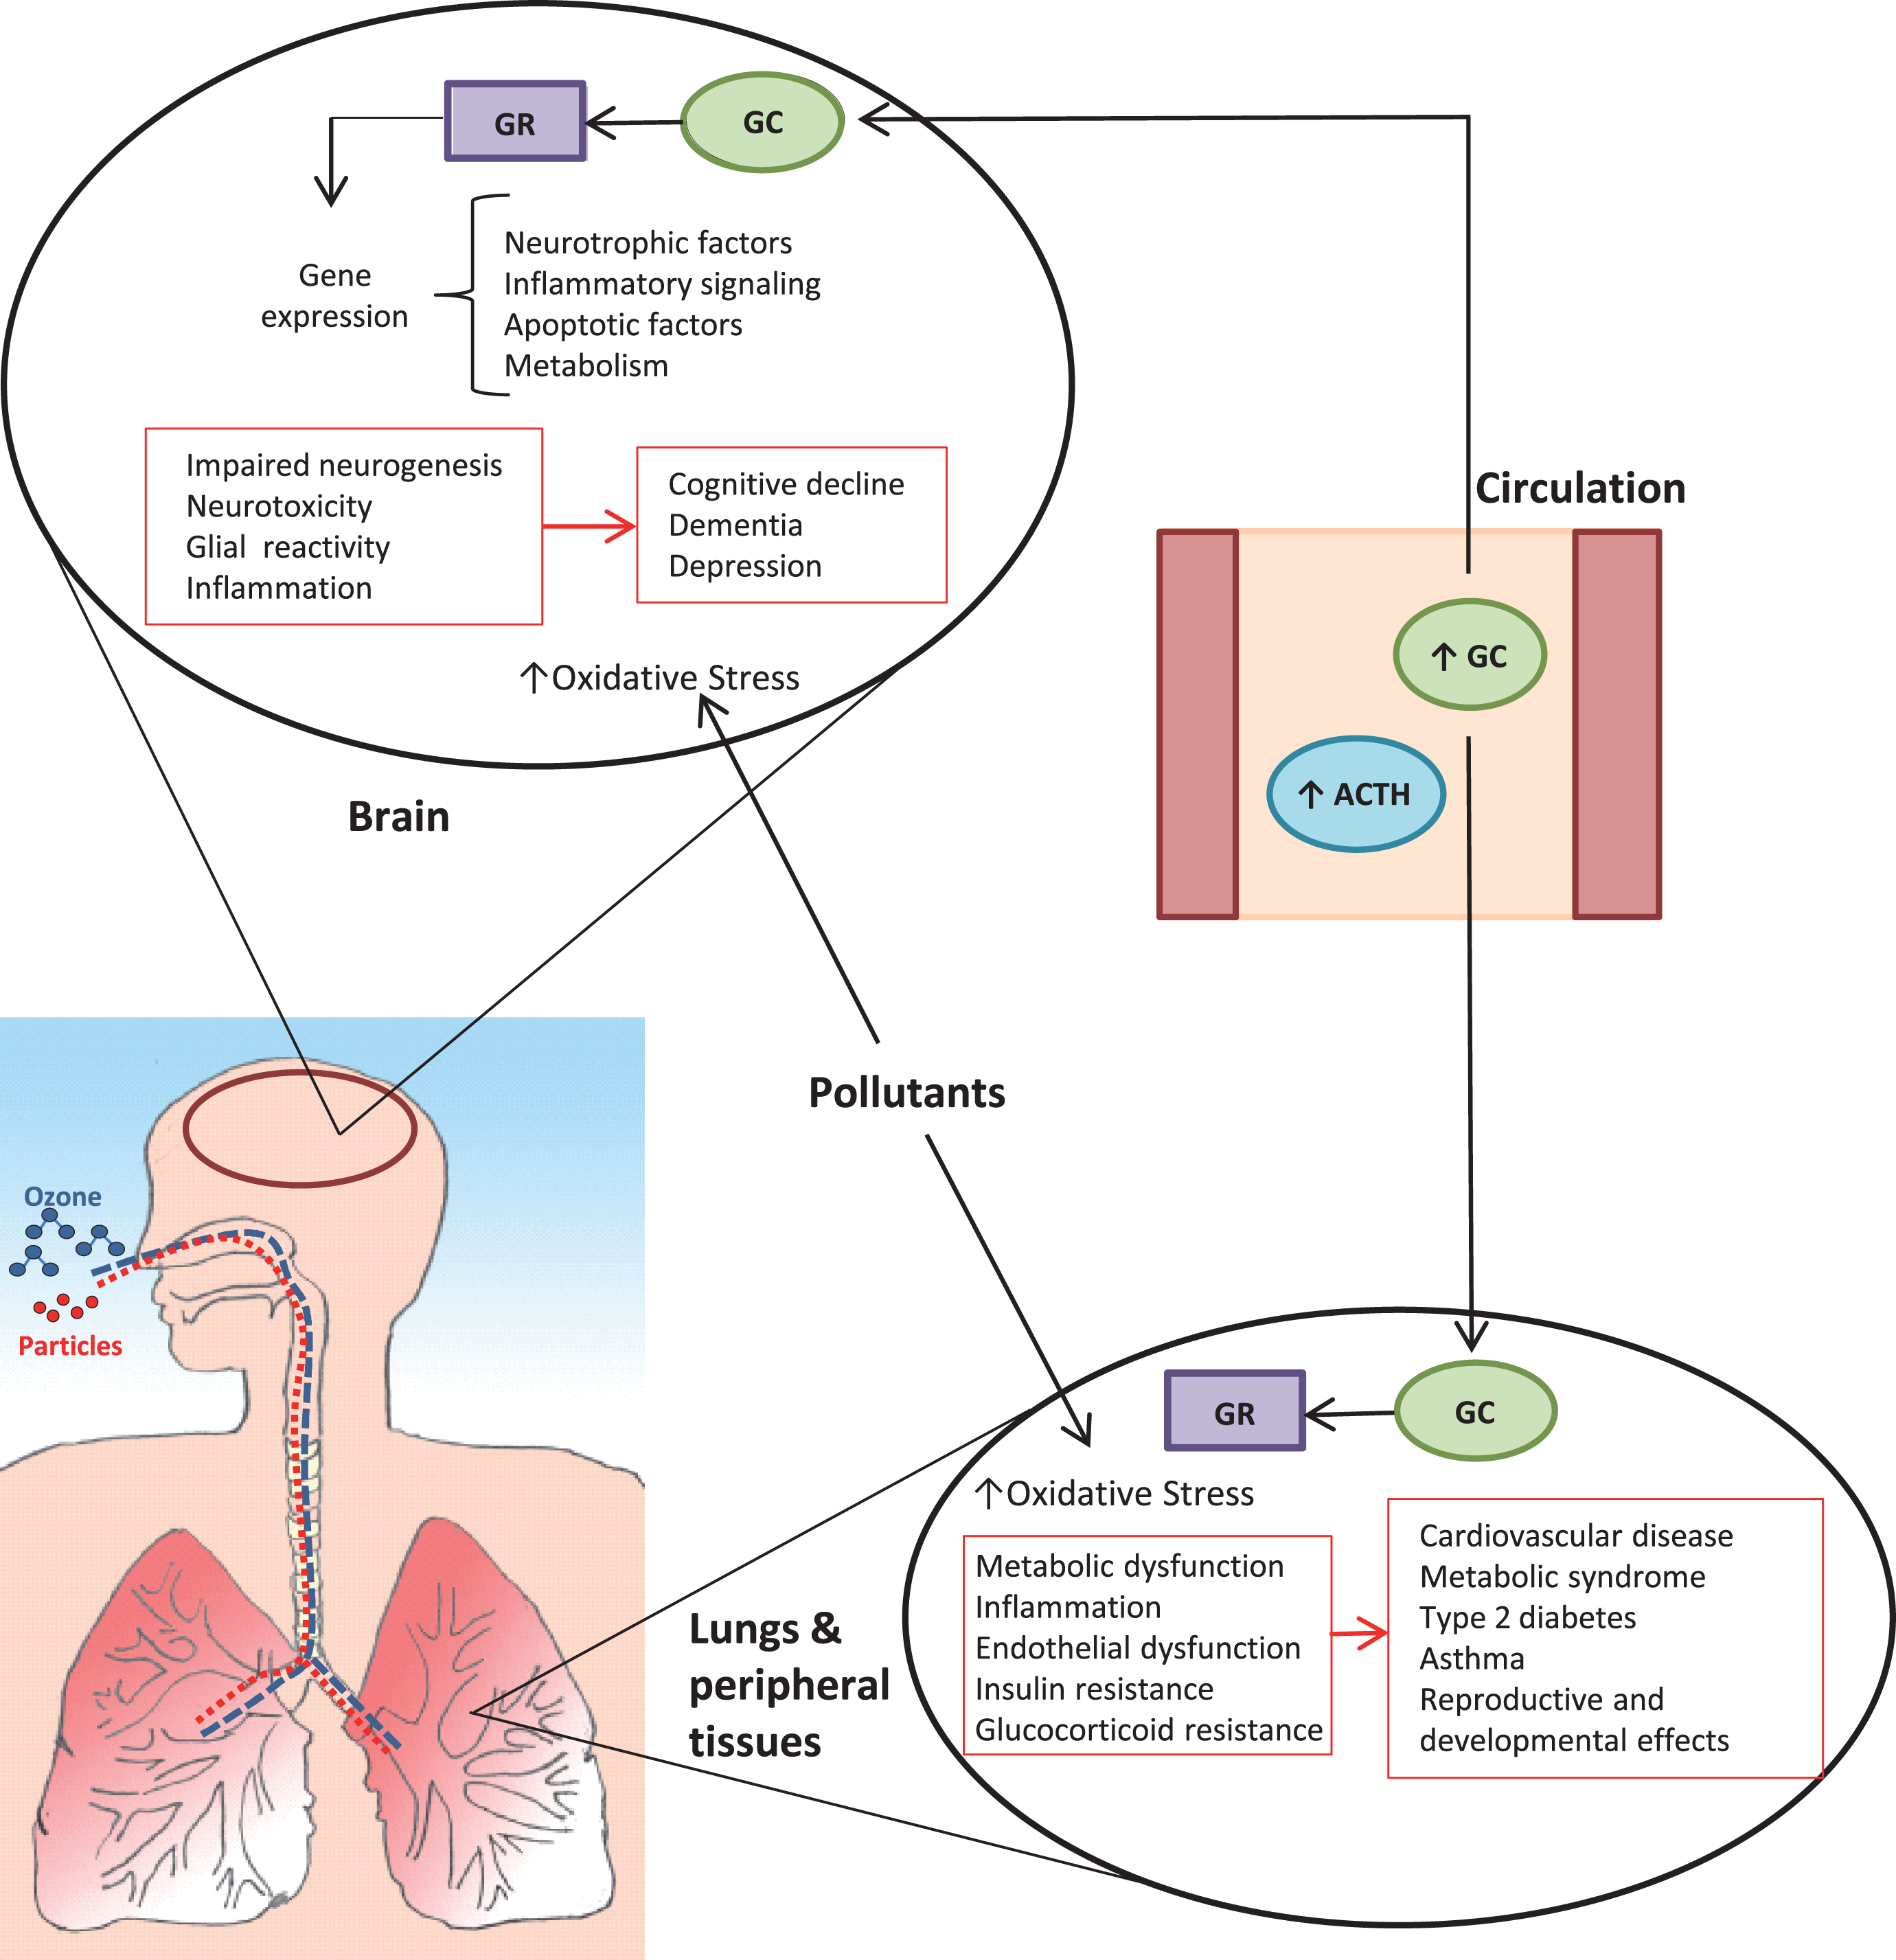 Proposed direct and systemic impacts of pollutant-induced stress axis activation on the brain. Both particulate matter and ozone trigger a stress response, resulting in pituitary release of adrenocorticotrophic hormone (ACTH), which in turn signals the adrenal glands to increase production of glucocorticoids (GC; primarily cortisol in humans, corticosterone in rodents). Glucocorticoids bind to receptors (GR) to regulate processes that include glucose and lipid homeostasis, immune/inflammatory function, and responses to other hormones. The stress hormone release coincides with and contributes to changes in blood mediators (e.g., cytokines, metabolic factors, reactive products) that have systemic impacts, including effects on the brain, lungs, and peripheral tissues. Chronic activation and dysregulation of the HPA axis is associated with a variety of adverse effects that include neurotoxicity, sensitization to other insults including oxidative stress, and impaired control of inflammatory processes. Collectively, these effects interact with individual susceptibility to contribute to disease processes that manifest systemically and in the brain.